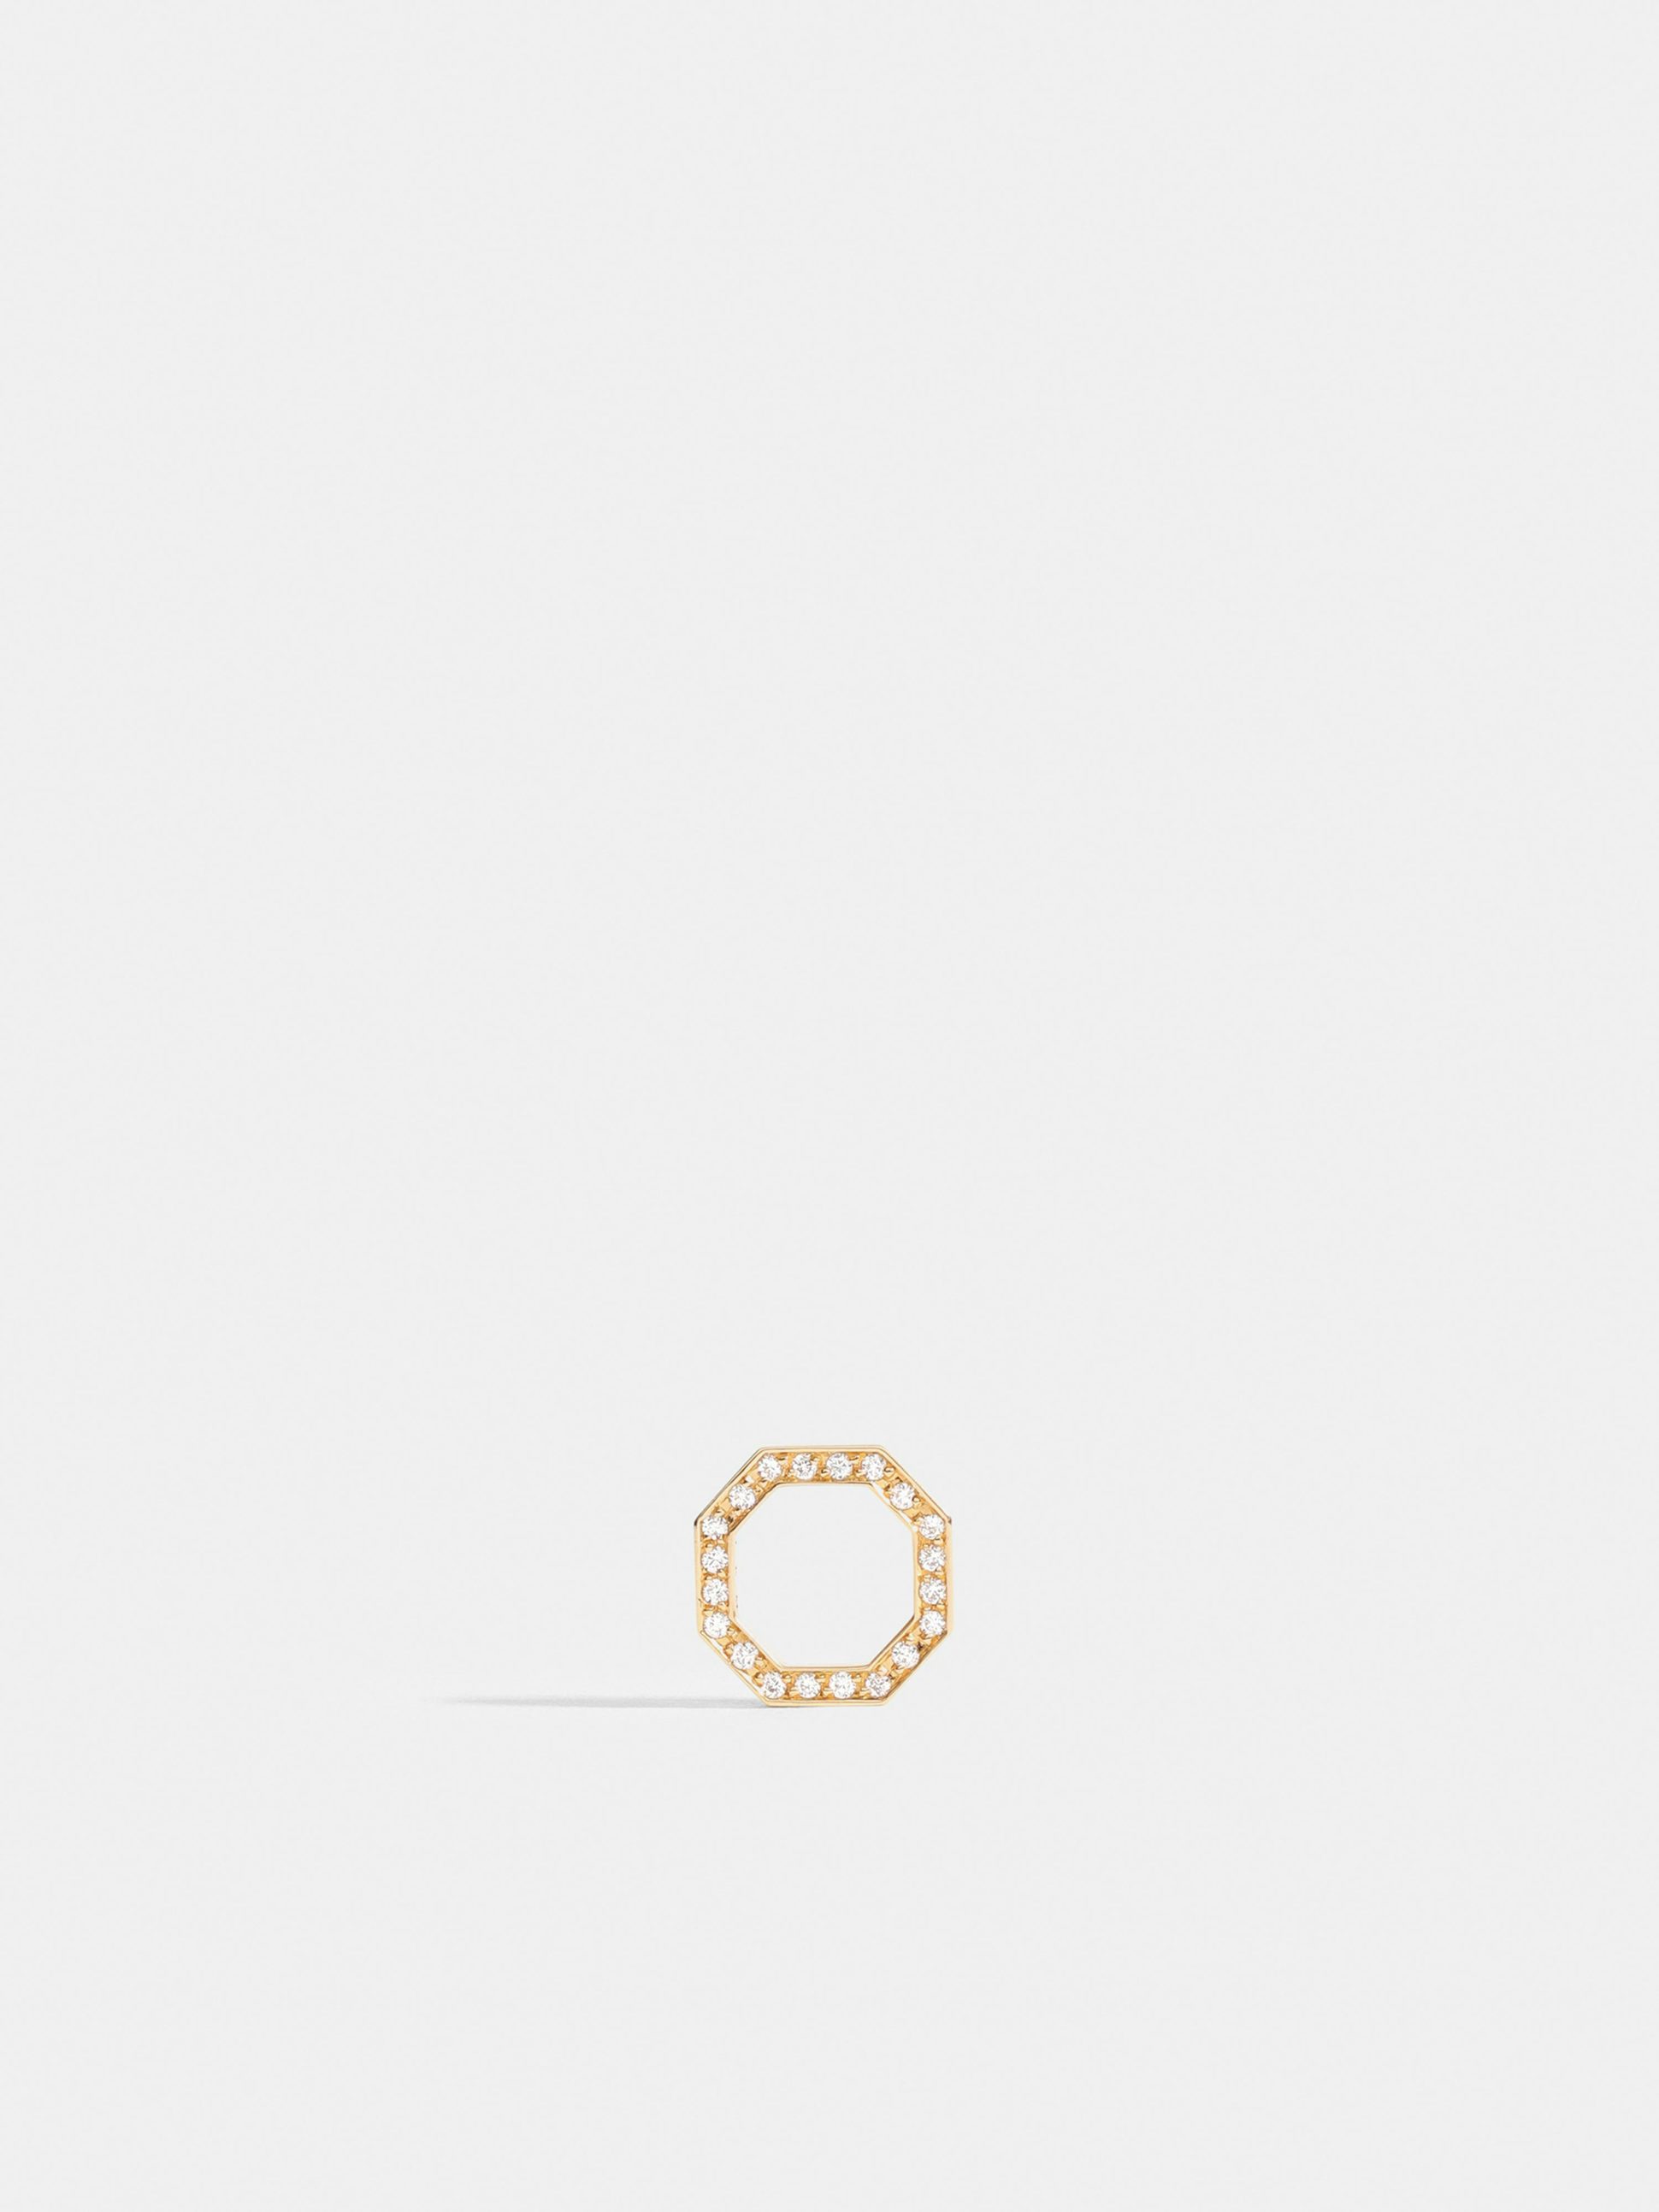 Octogone motif in 18k Fairmined ethical yellow gold, paved with lab-grown diamonds, on a black cord.